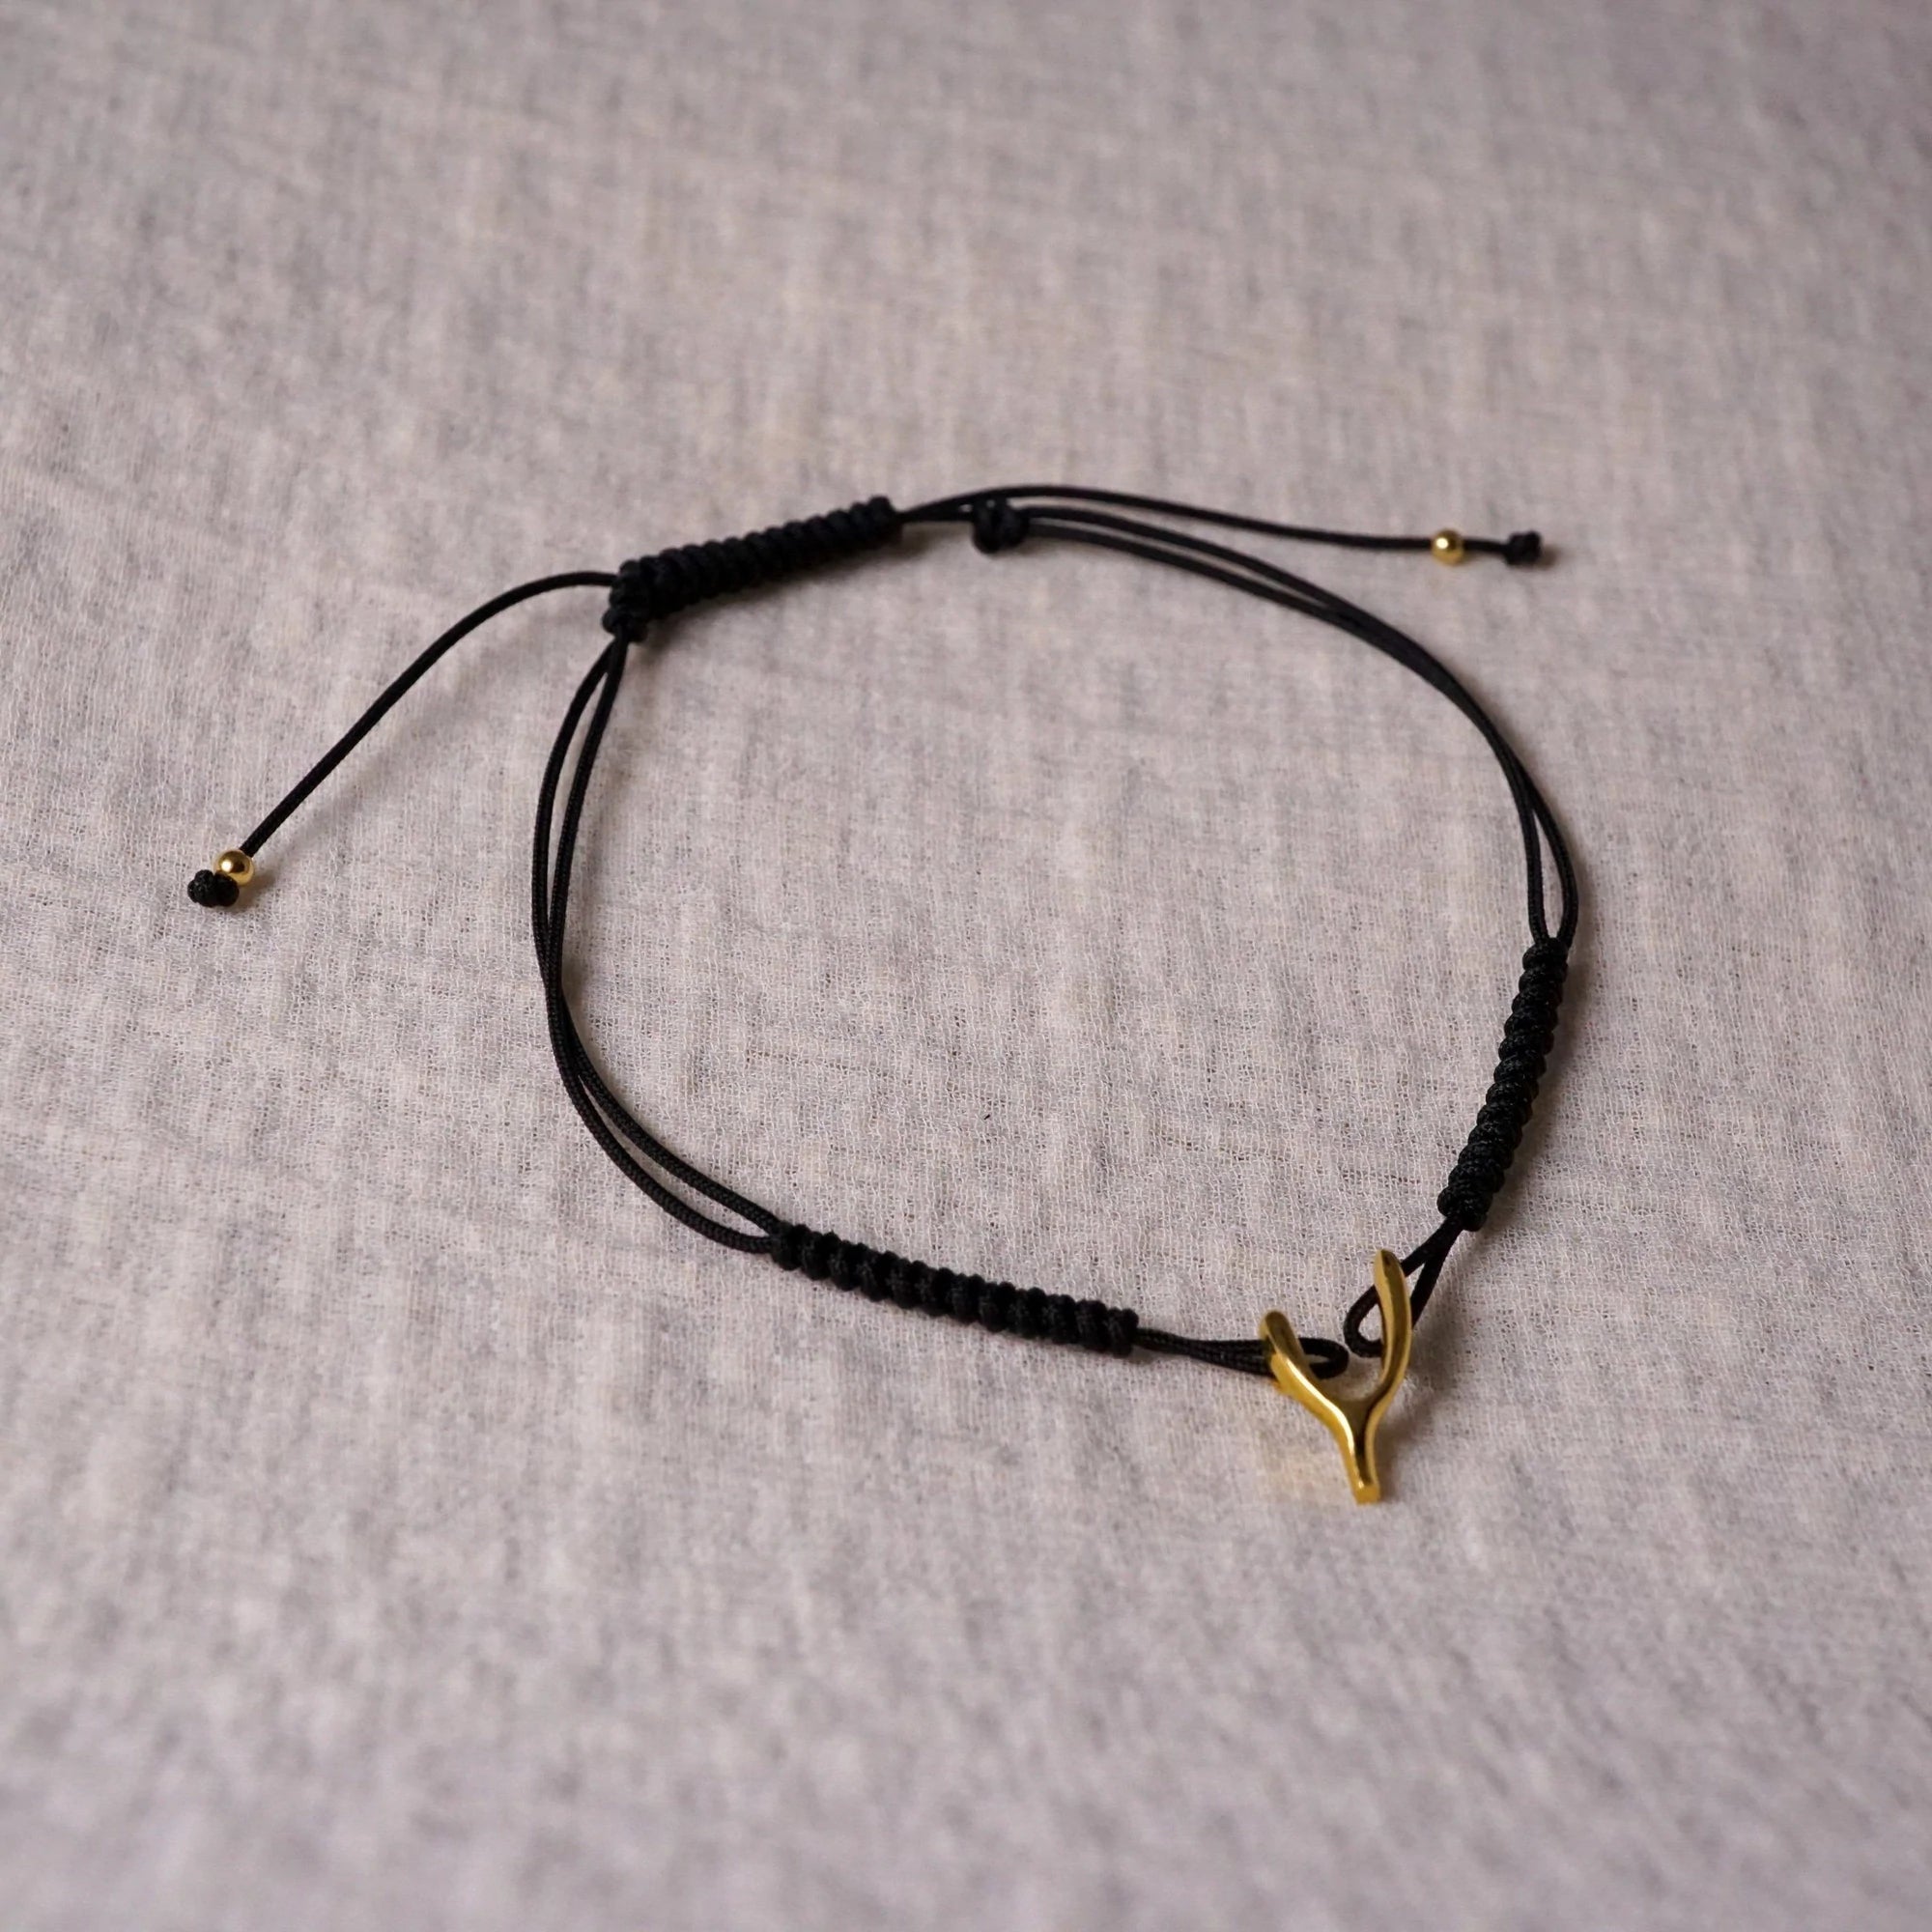 Garden of Desire - Wishbone Bracelet A symbol of hope, this adjustable braided drawstring bracelet in black features a handcrafted 92.5 sterling Wishbone charm.